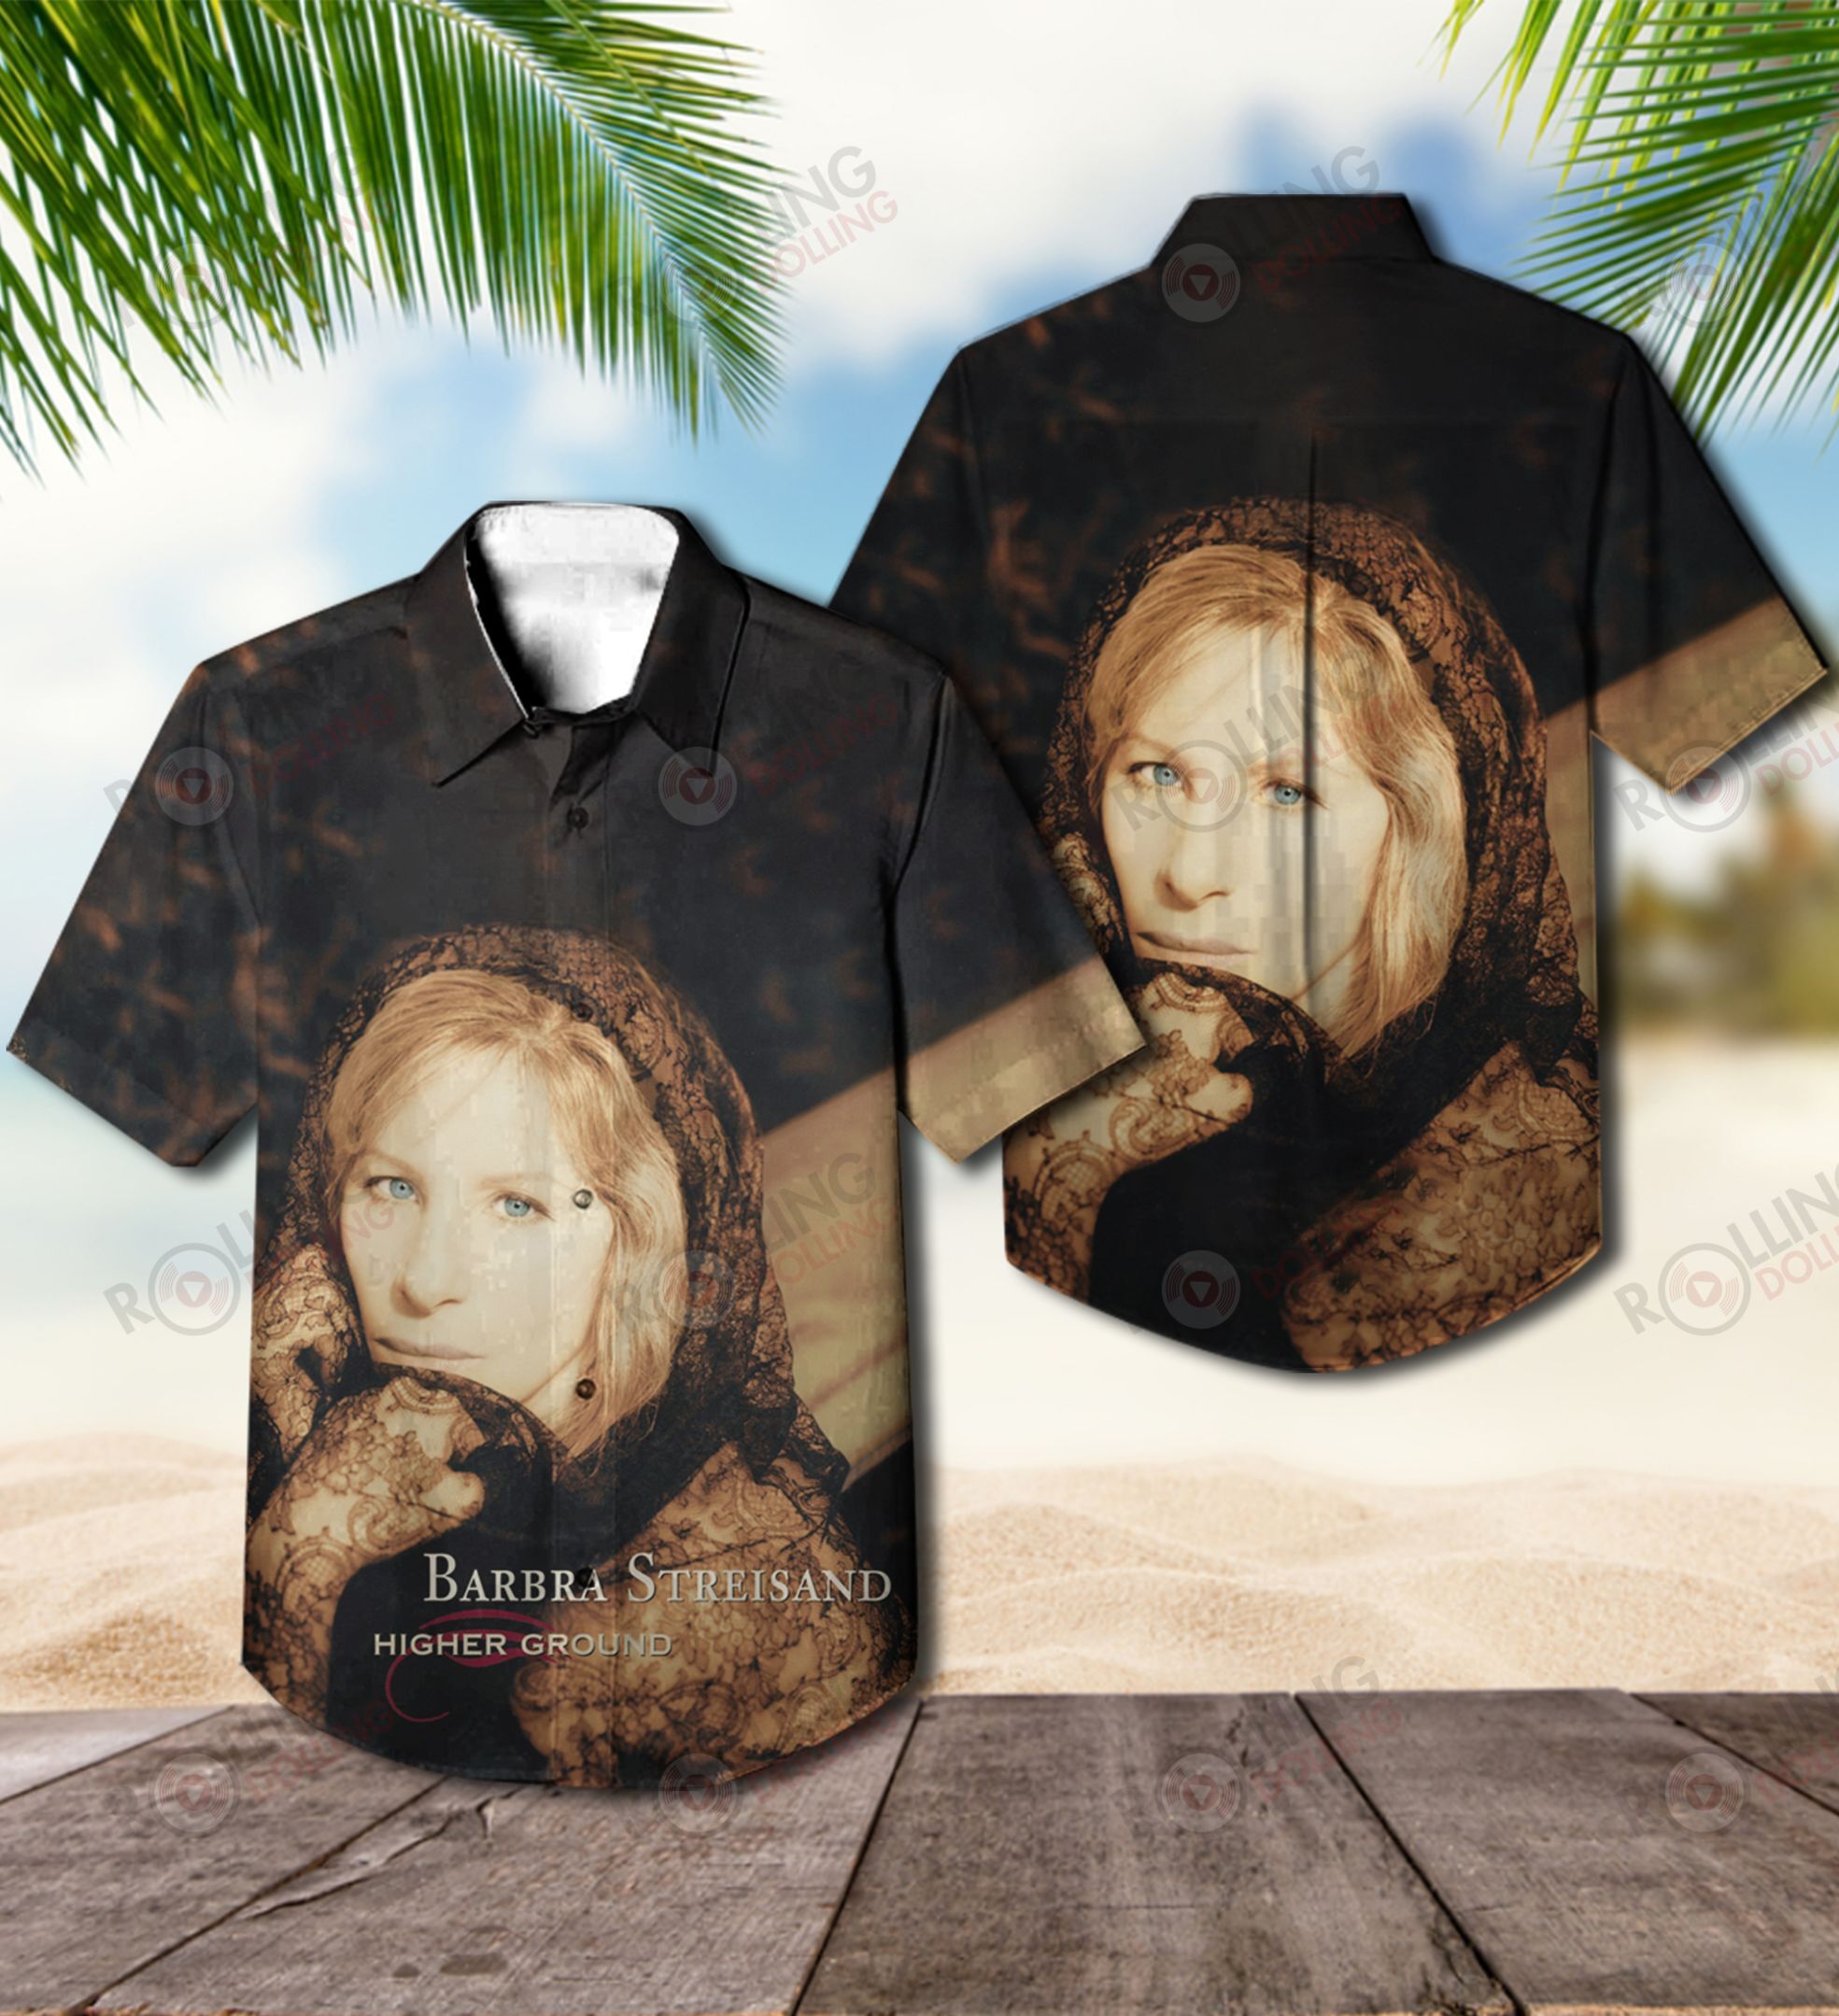 These Hawaiian Shirt will be a great choice for any type of occasion 215